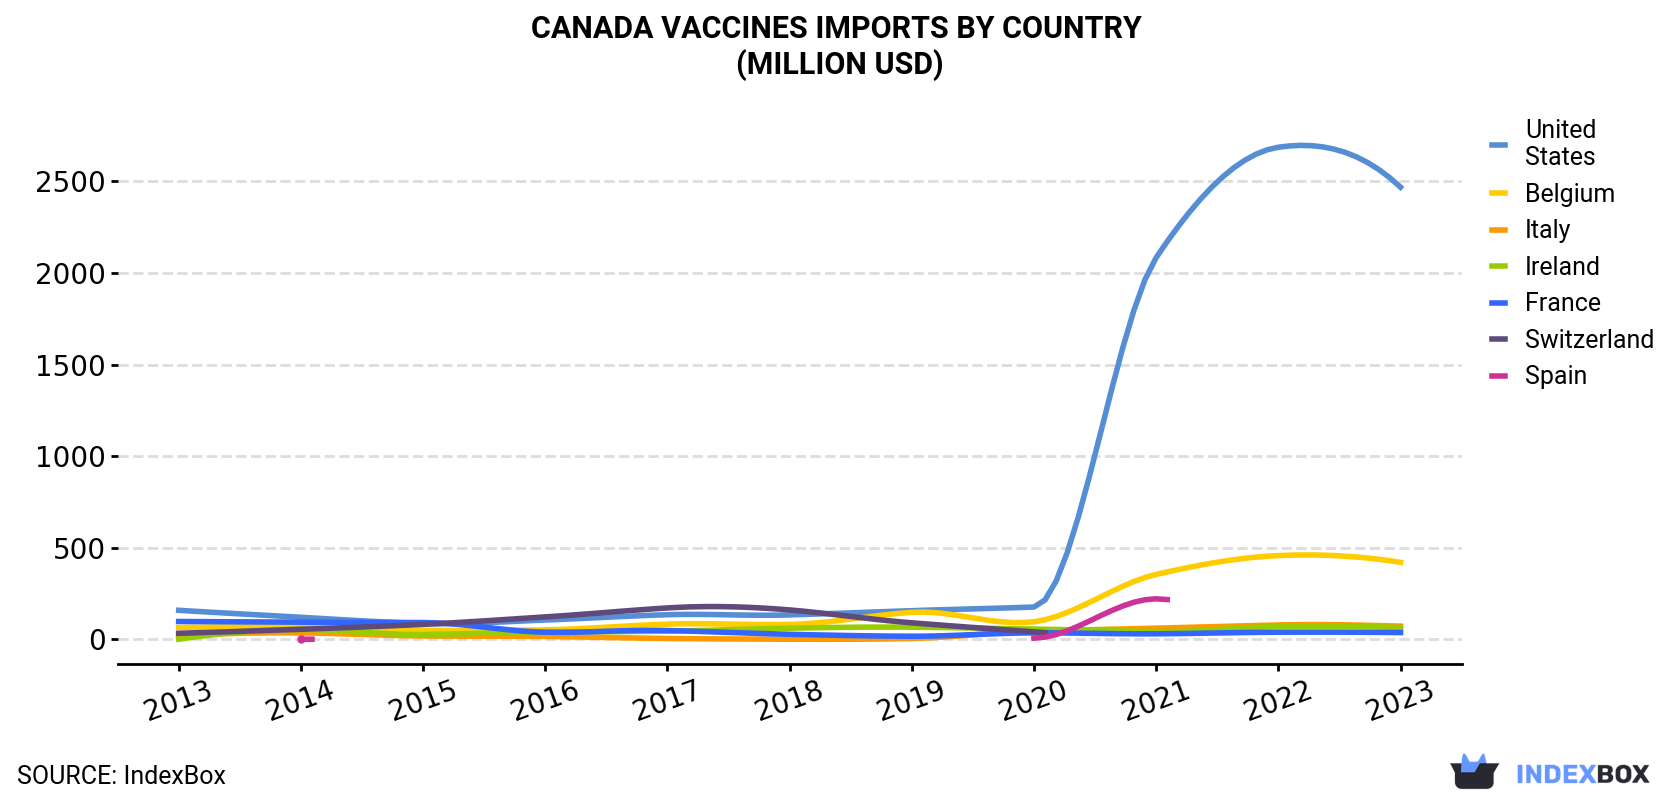 Canada Vaccines Imports By Country (Million USD)